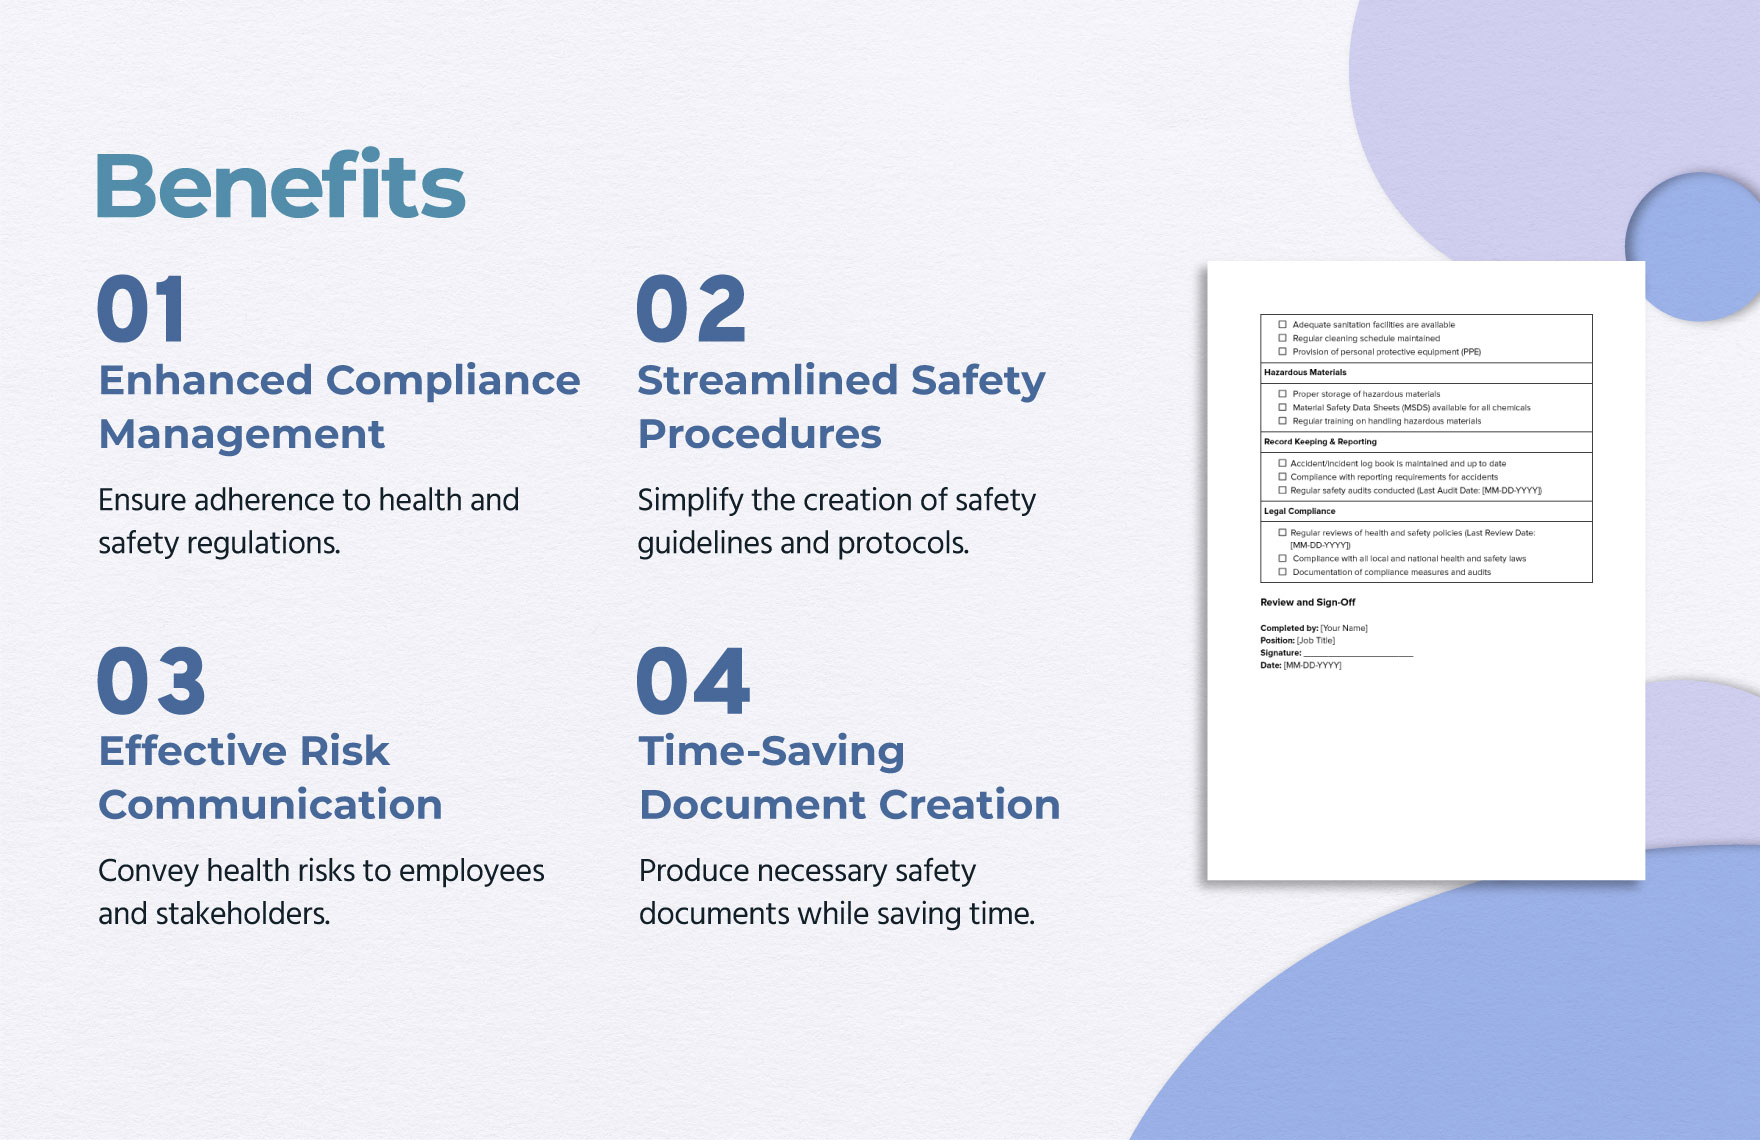 Health & Safety Legal Compliance Checklist Template